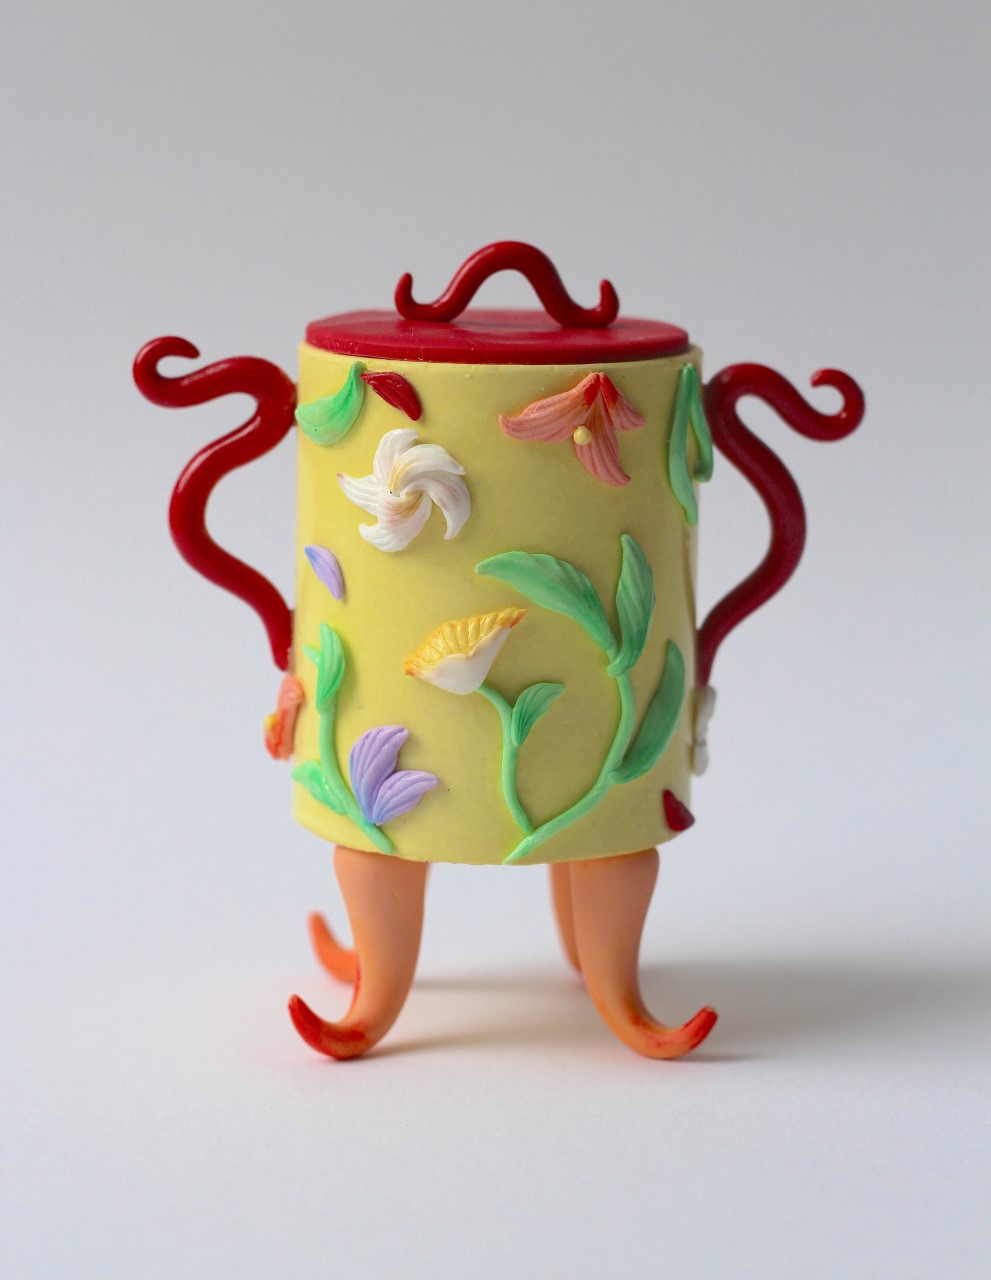 Hannah Lim, Yellow Snuff Bottle with Fiery Arms 2